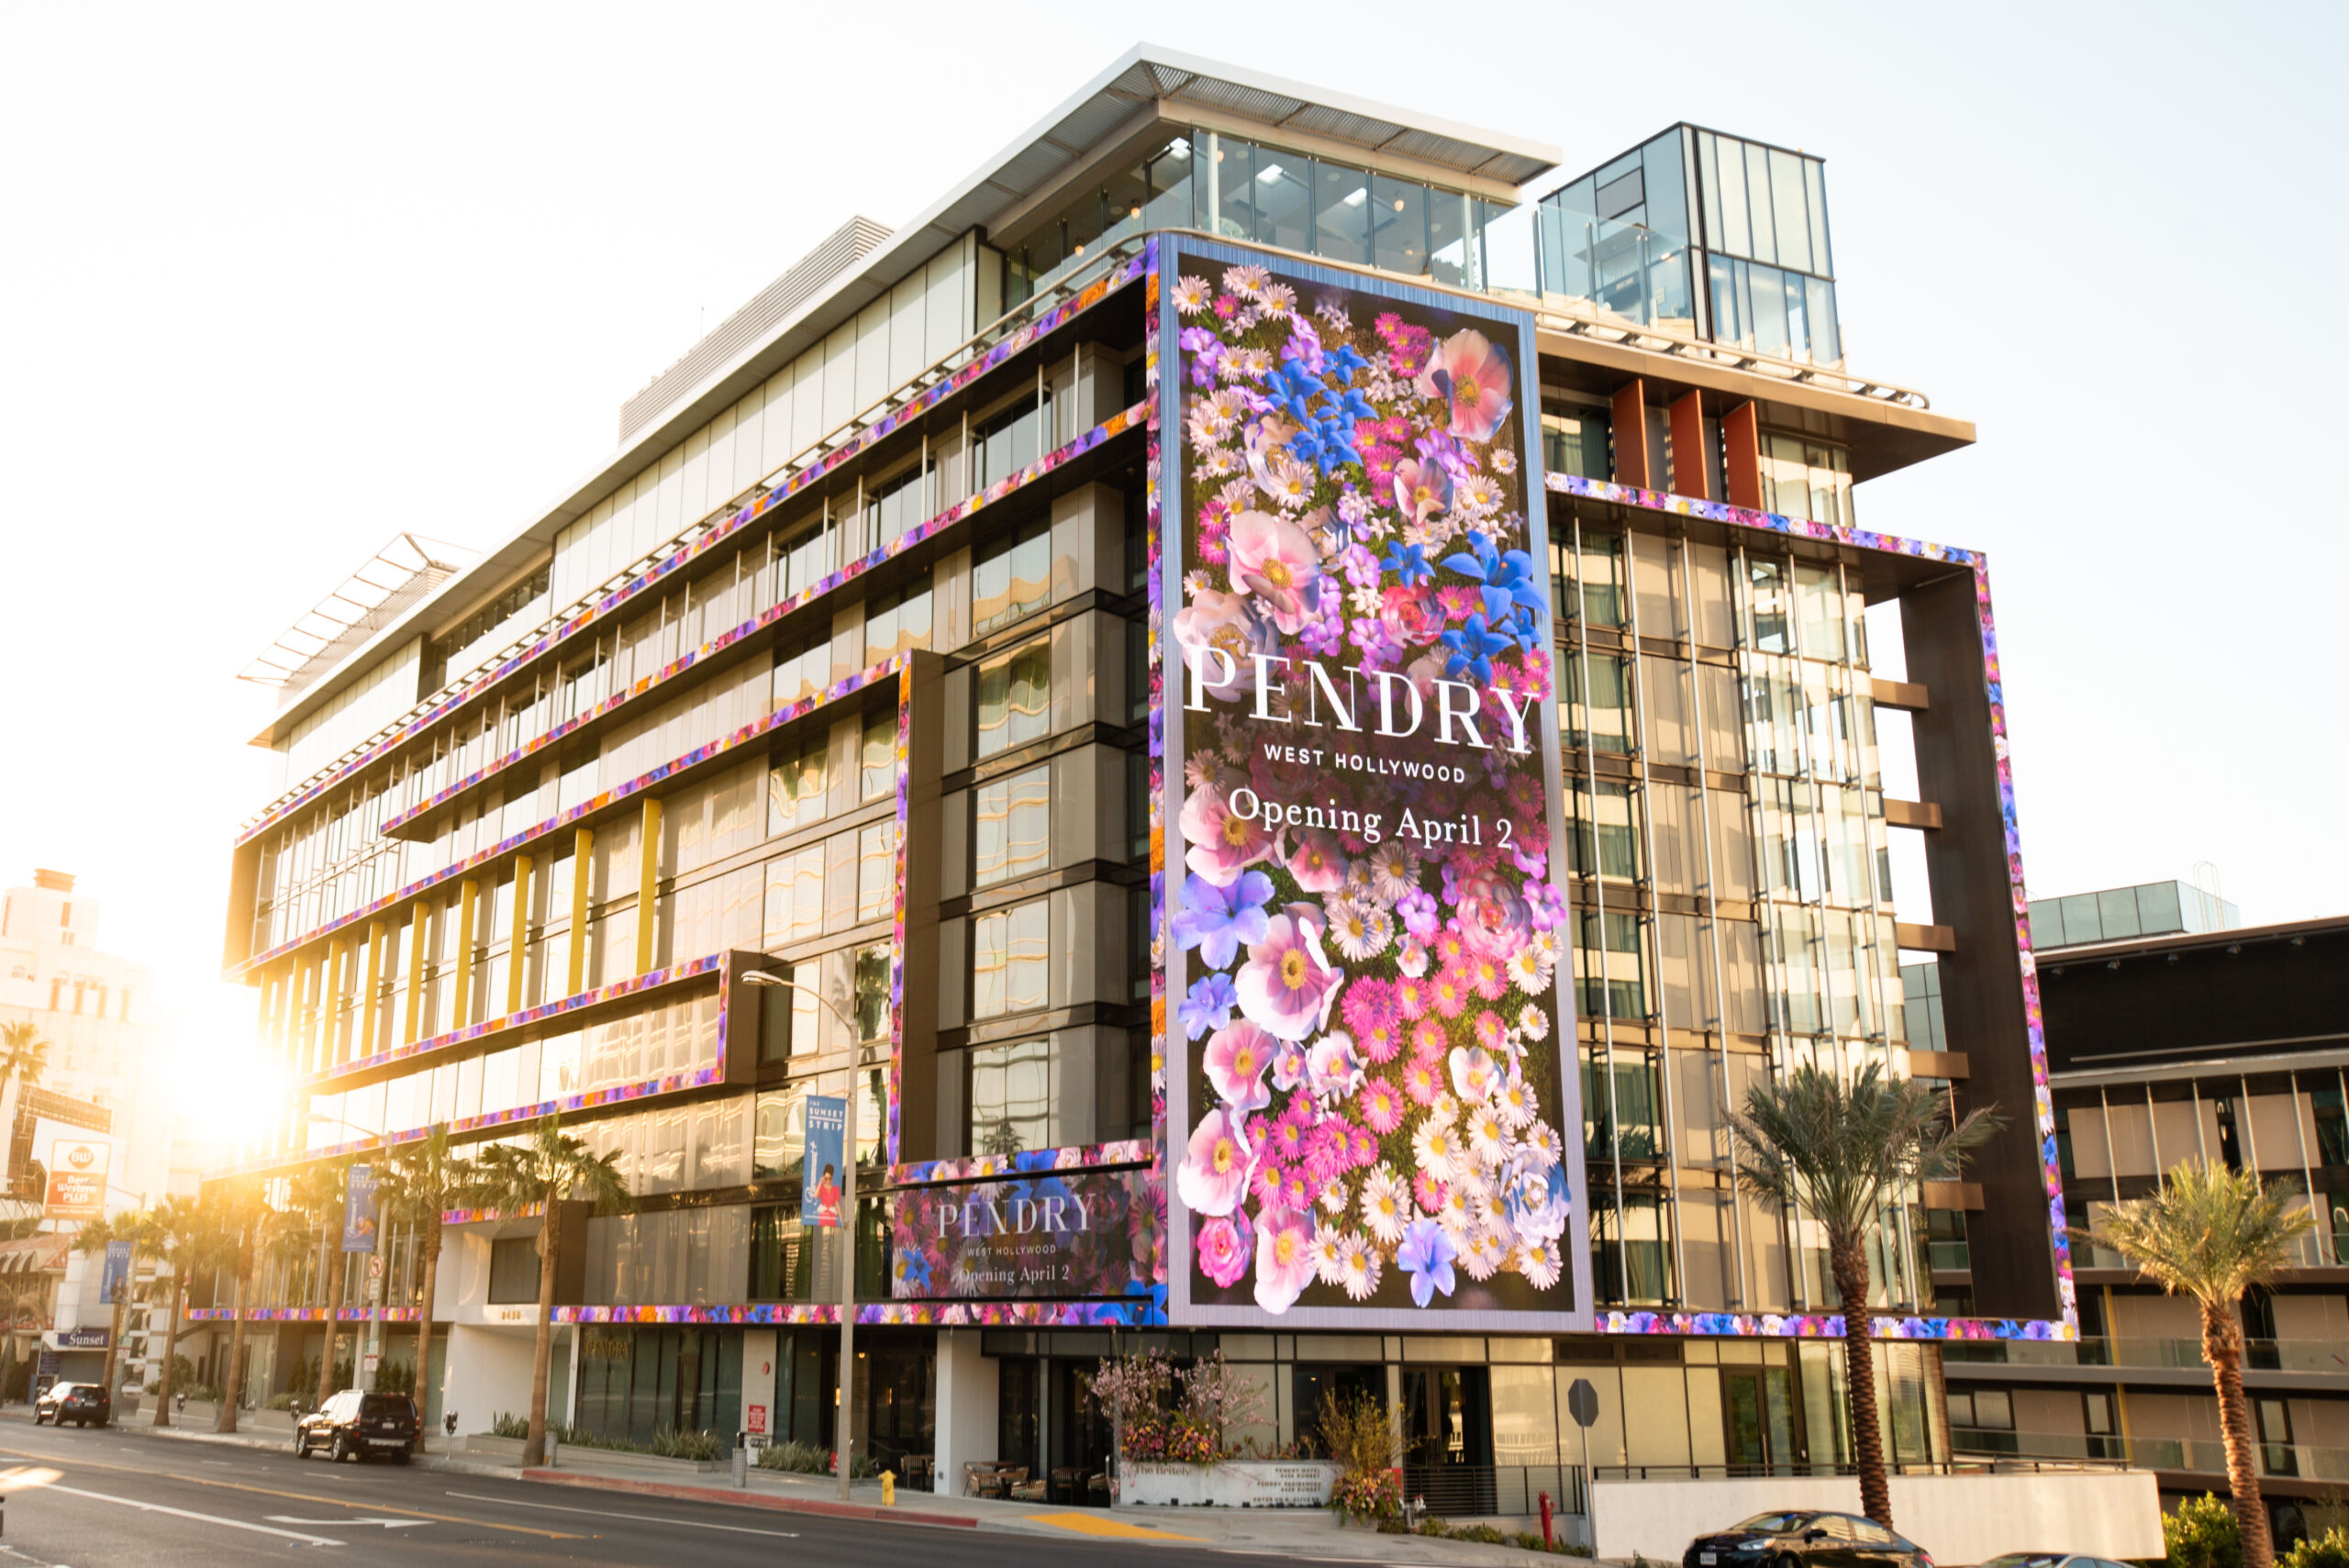 Exterior shot of Pendry West Hollywood hotel